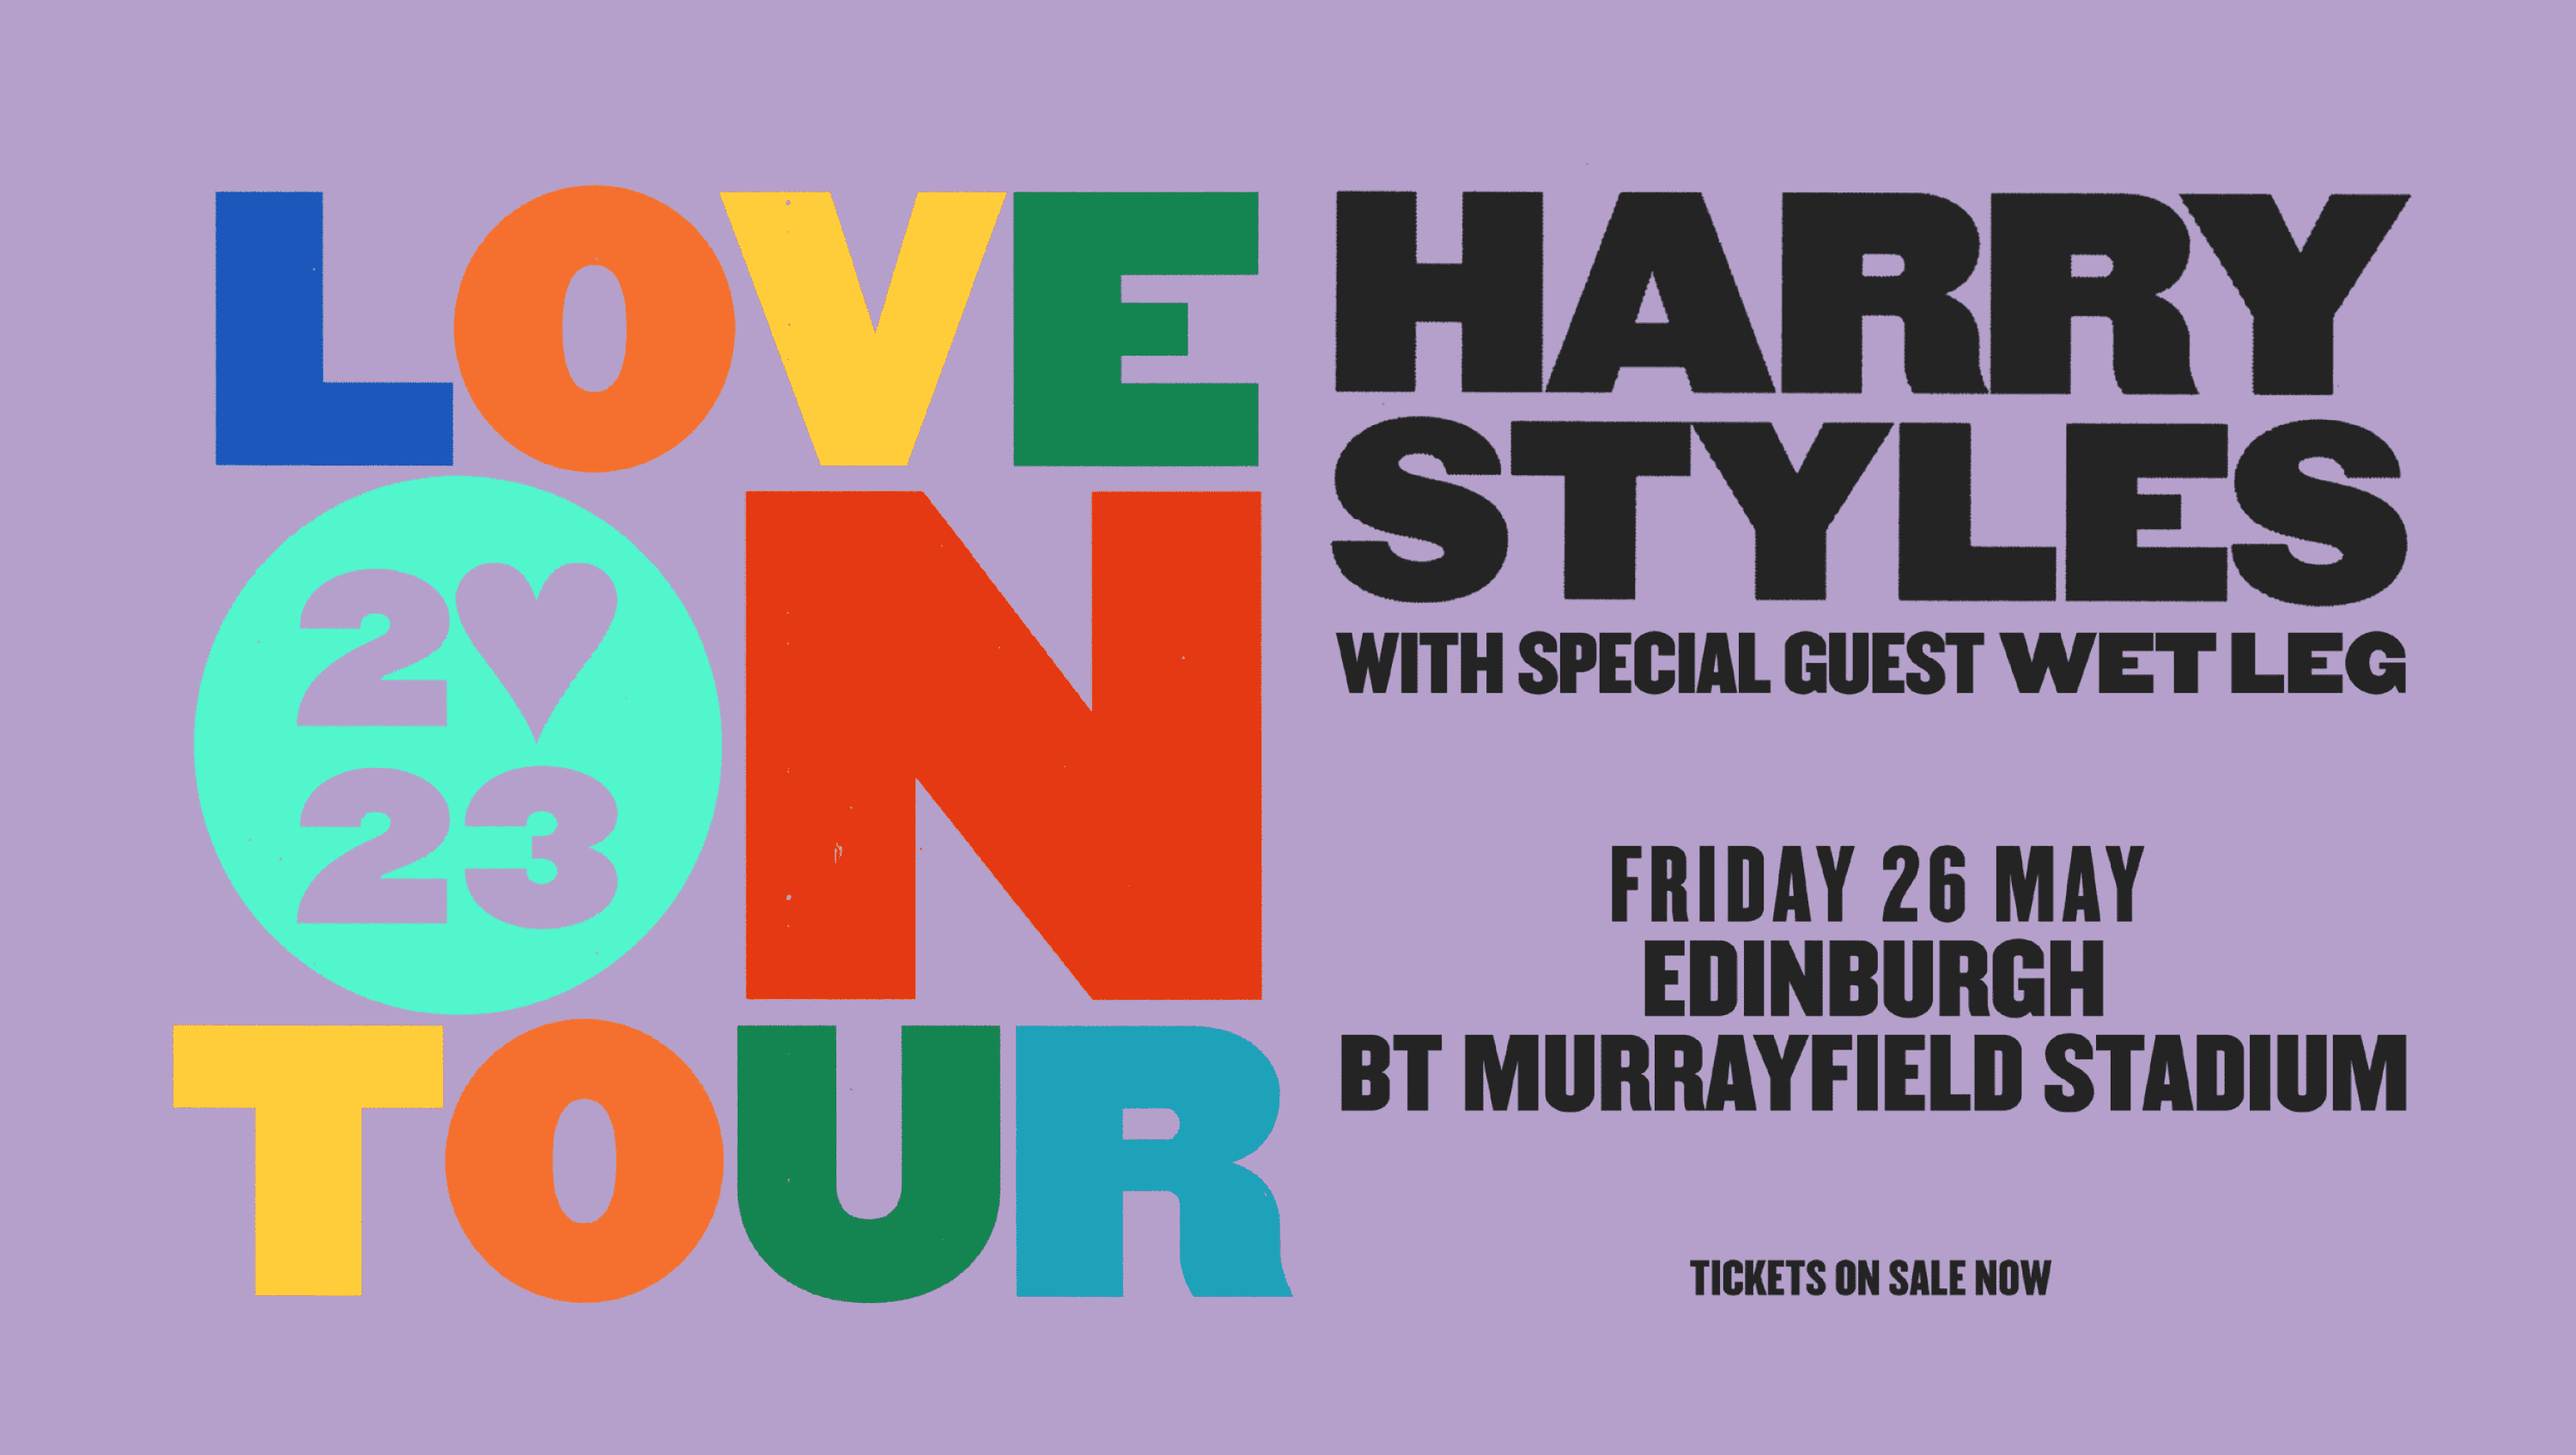 Love On Tour 2023 - Harry Styles with special Guest Wet Leg. Friday 26 May Edinburgh BT Murrayfield Stadium